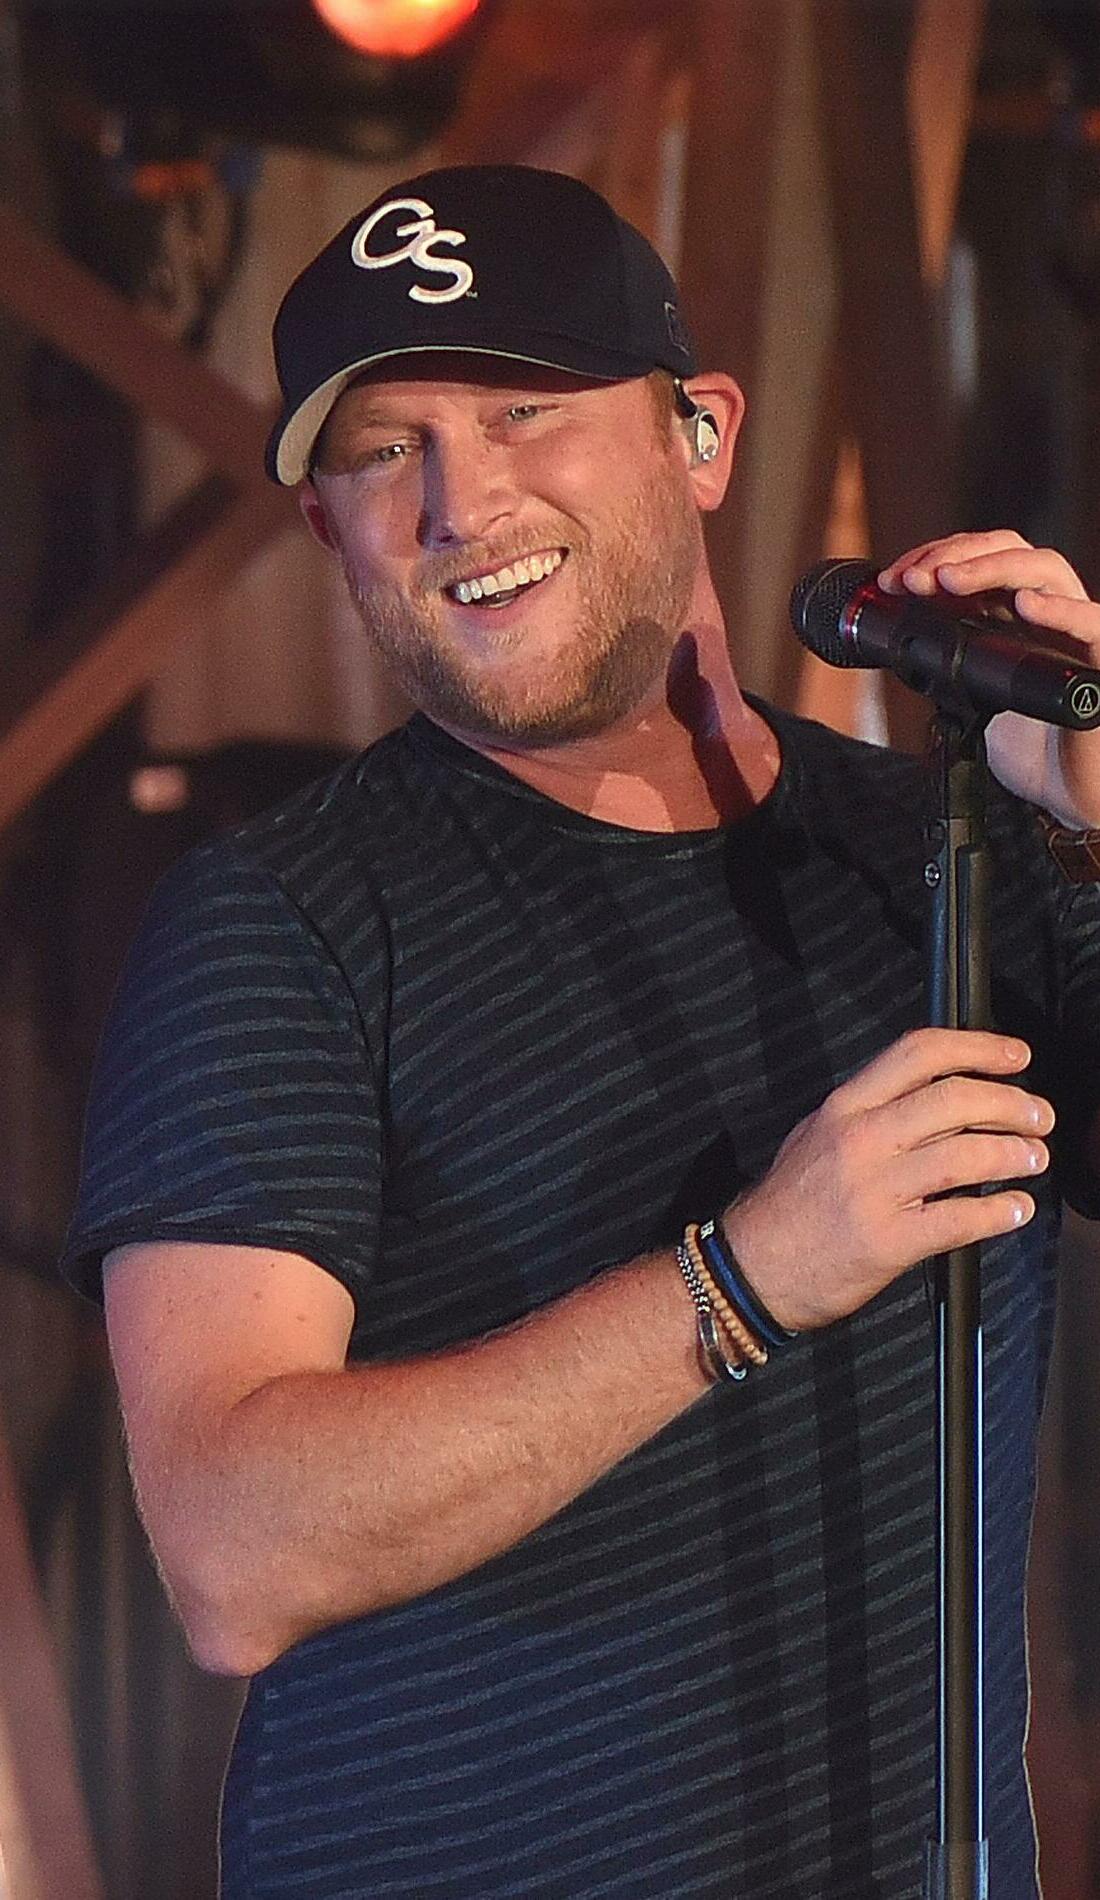 A Cole Swindell live event